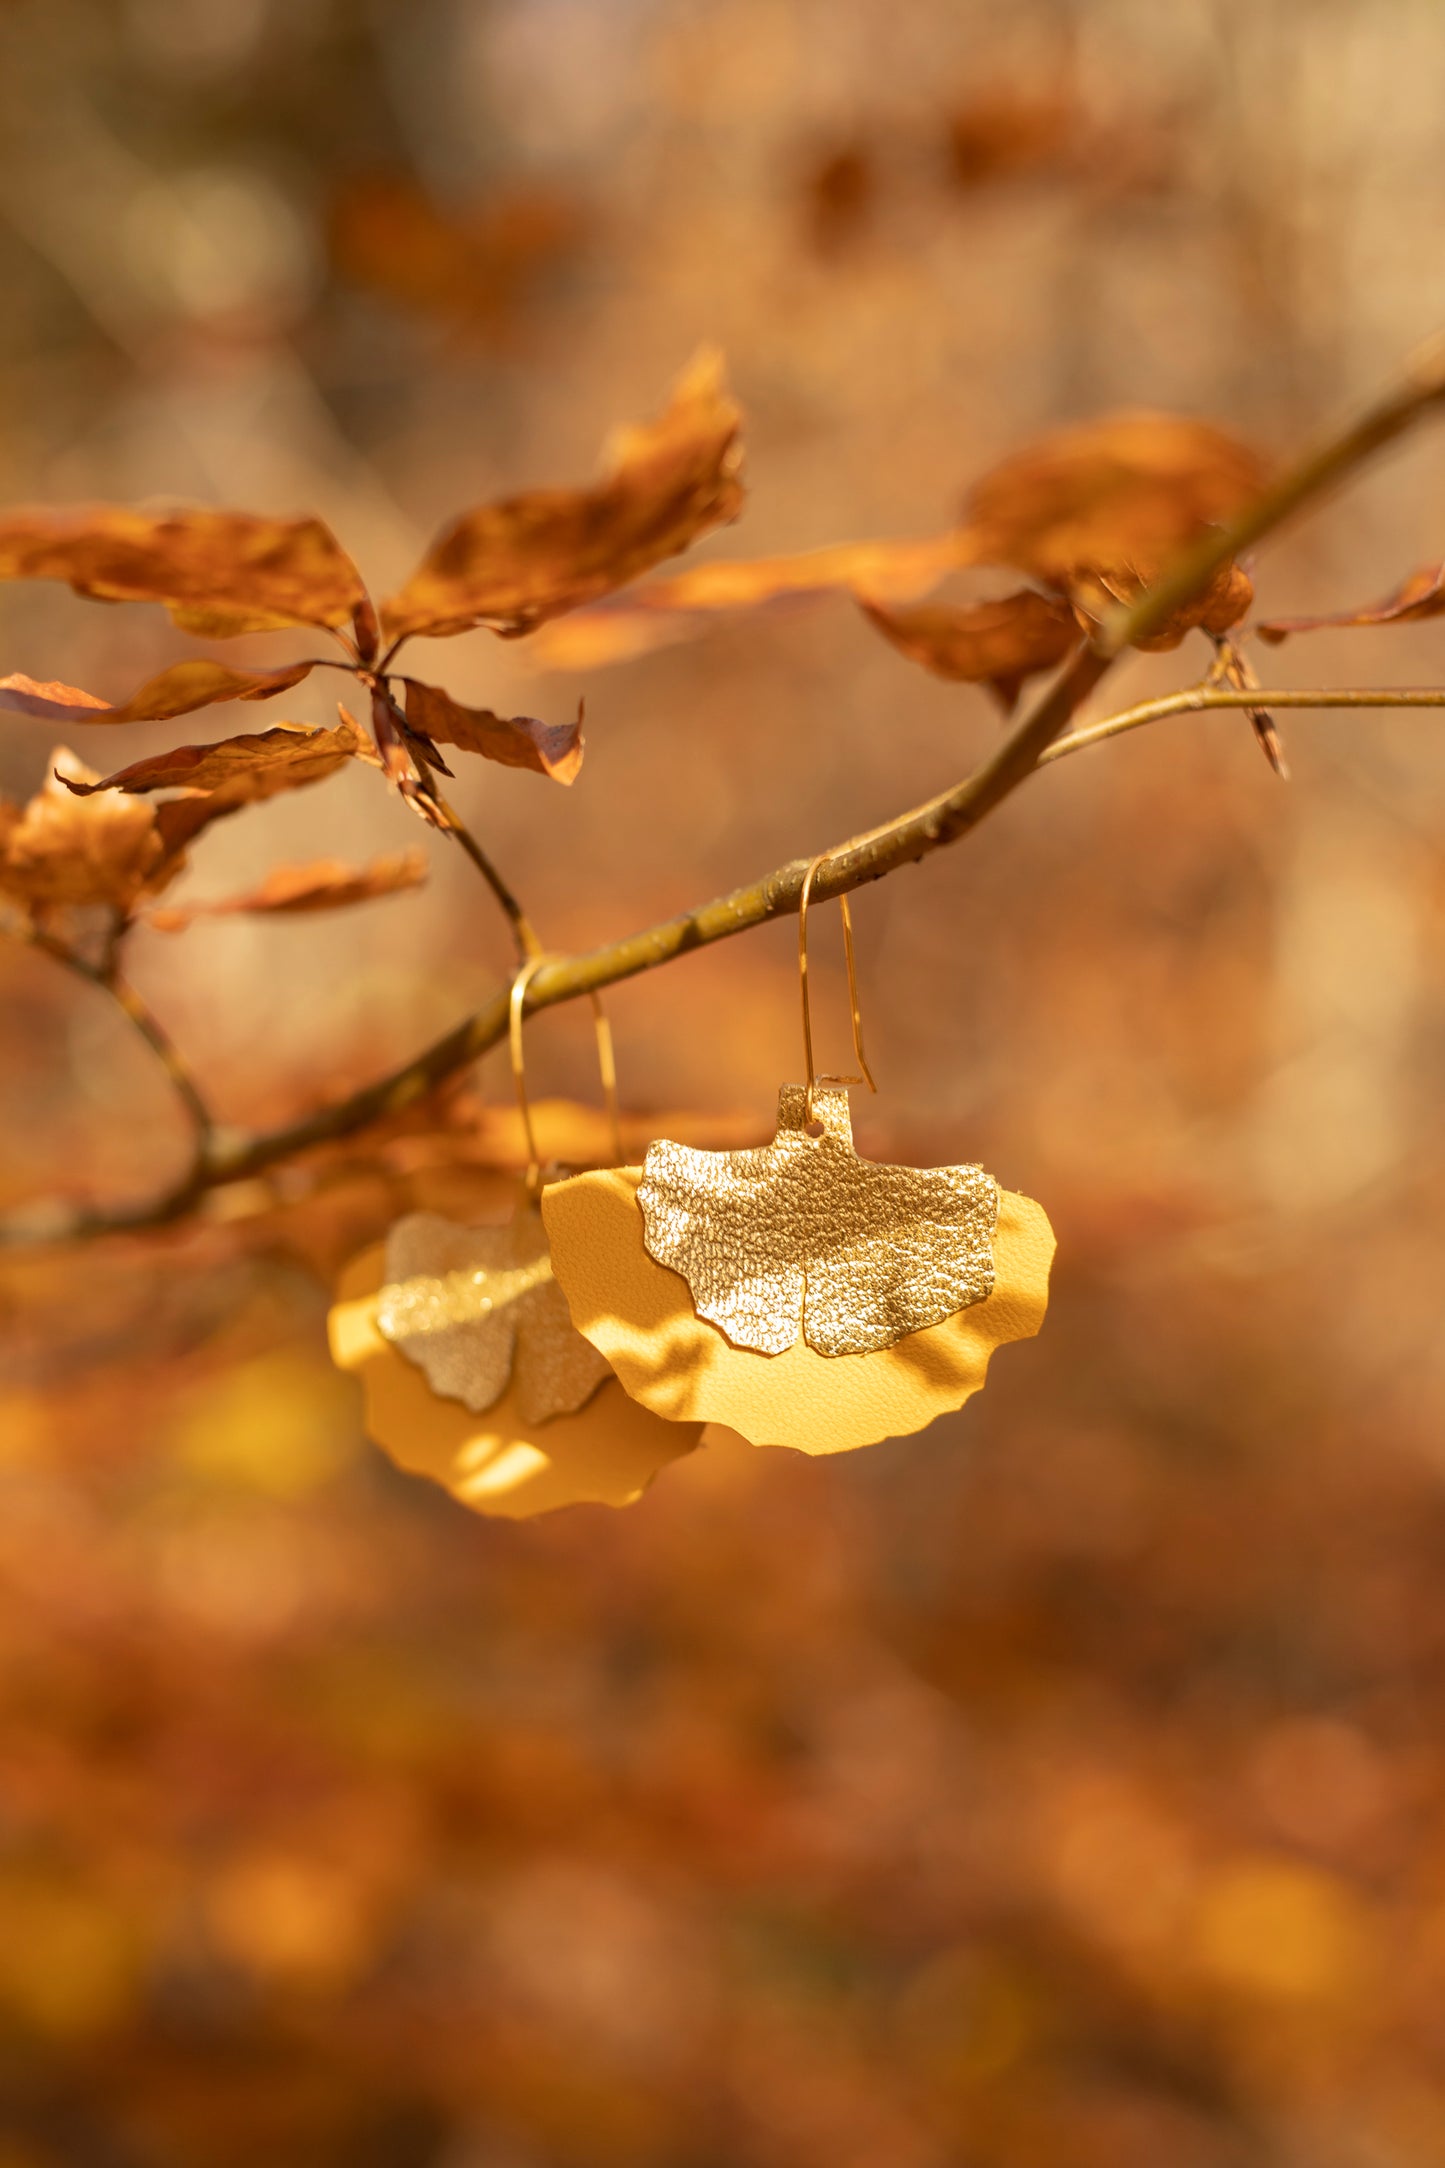 Copy of Ginkgo leaf earrings in ocher and gold yellow leather